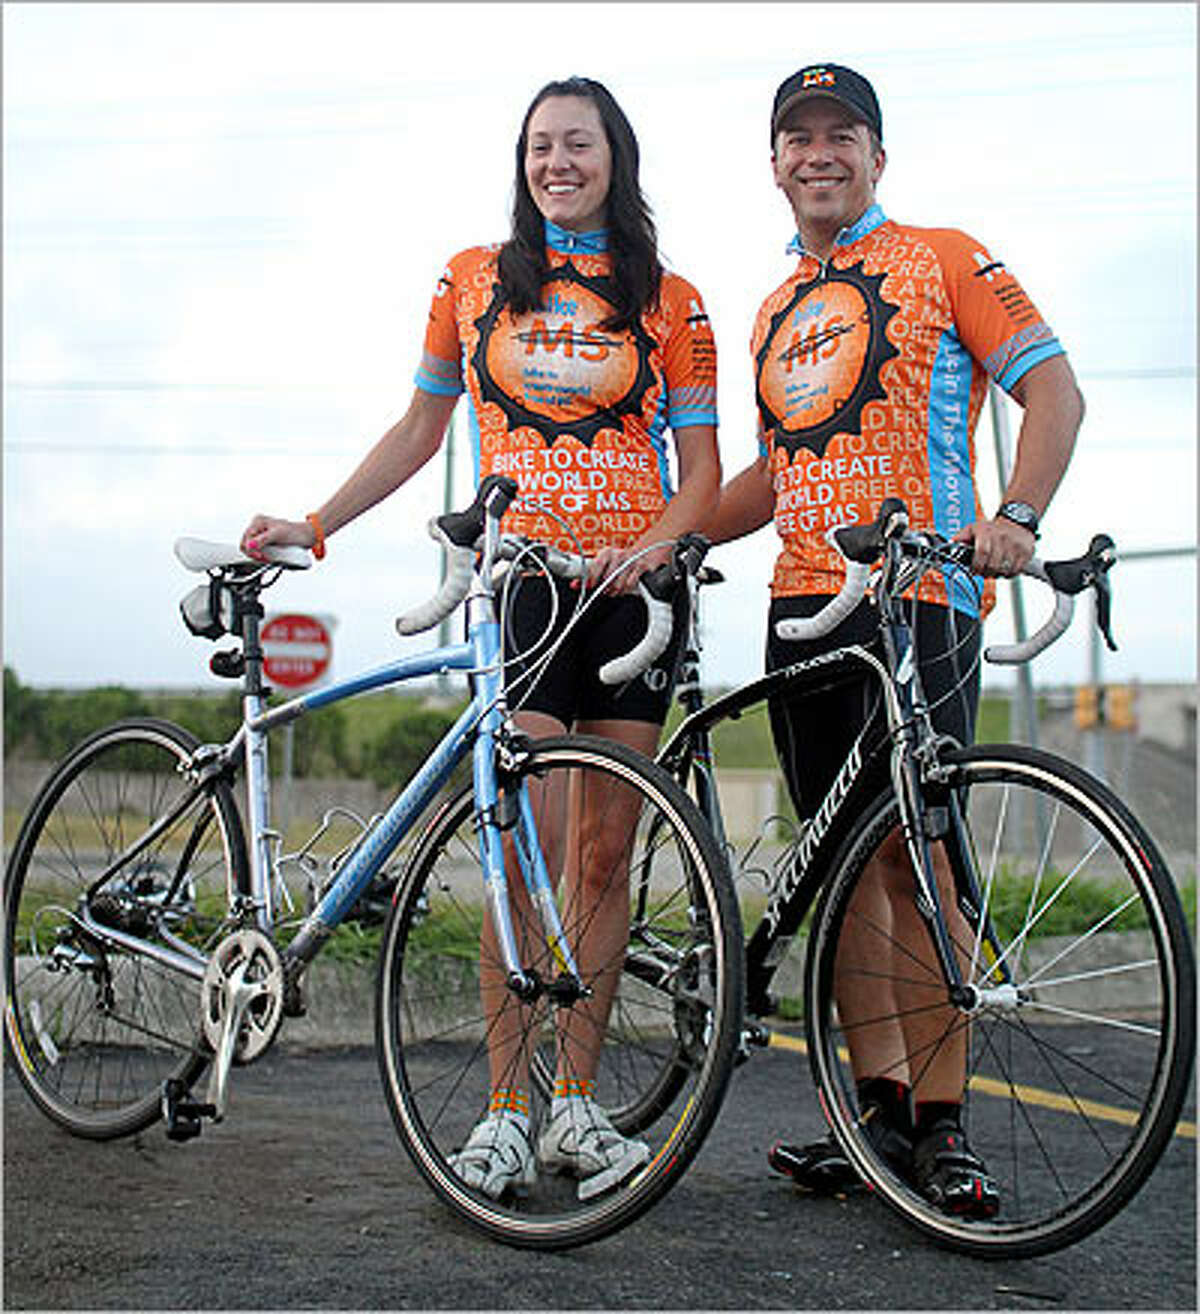 Jeff Vaughn and wife Jaime ride in support of Jaime's mom, who has MS.